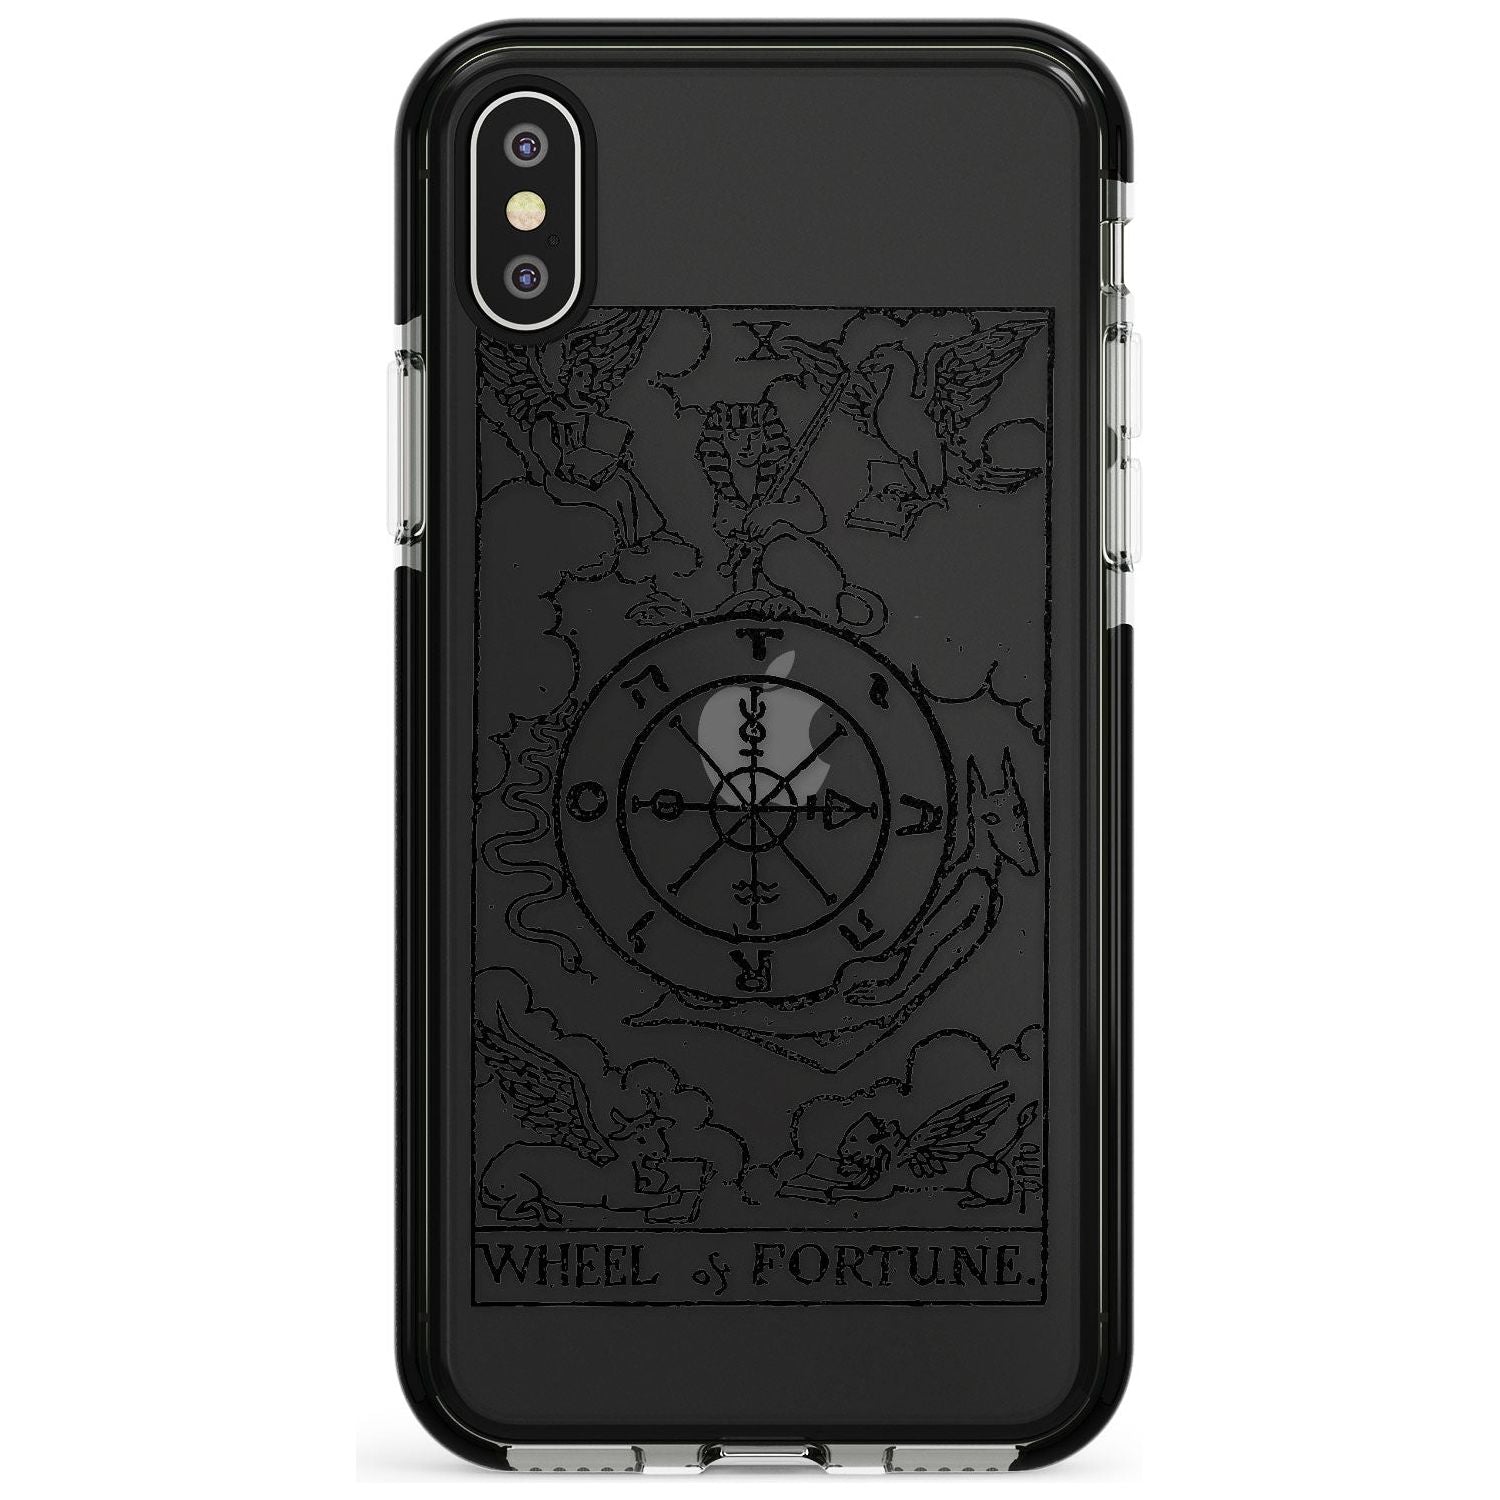 Wheel of Fortune Tarot Card - Transparent Pink Fade Impact Phone Case for iPhone X XS Max XR